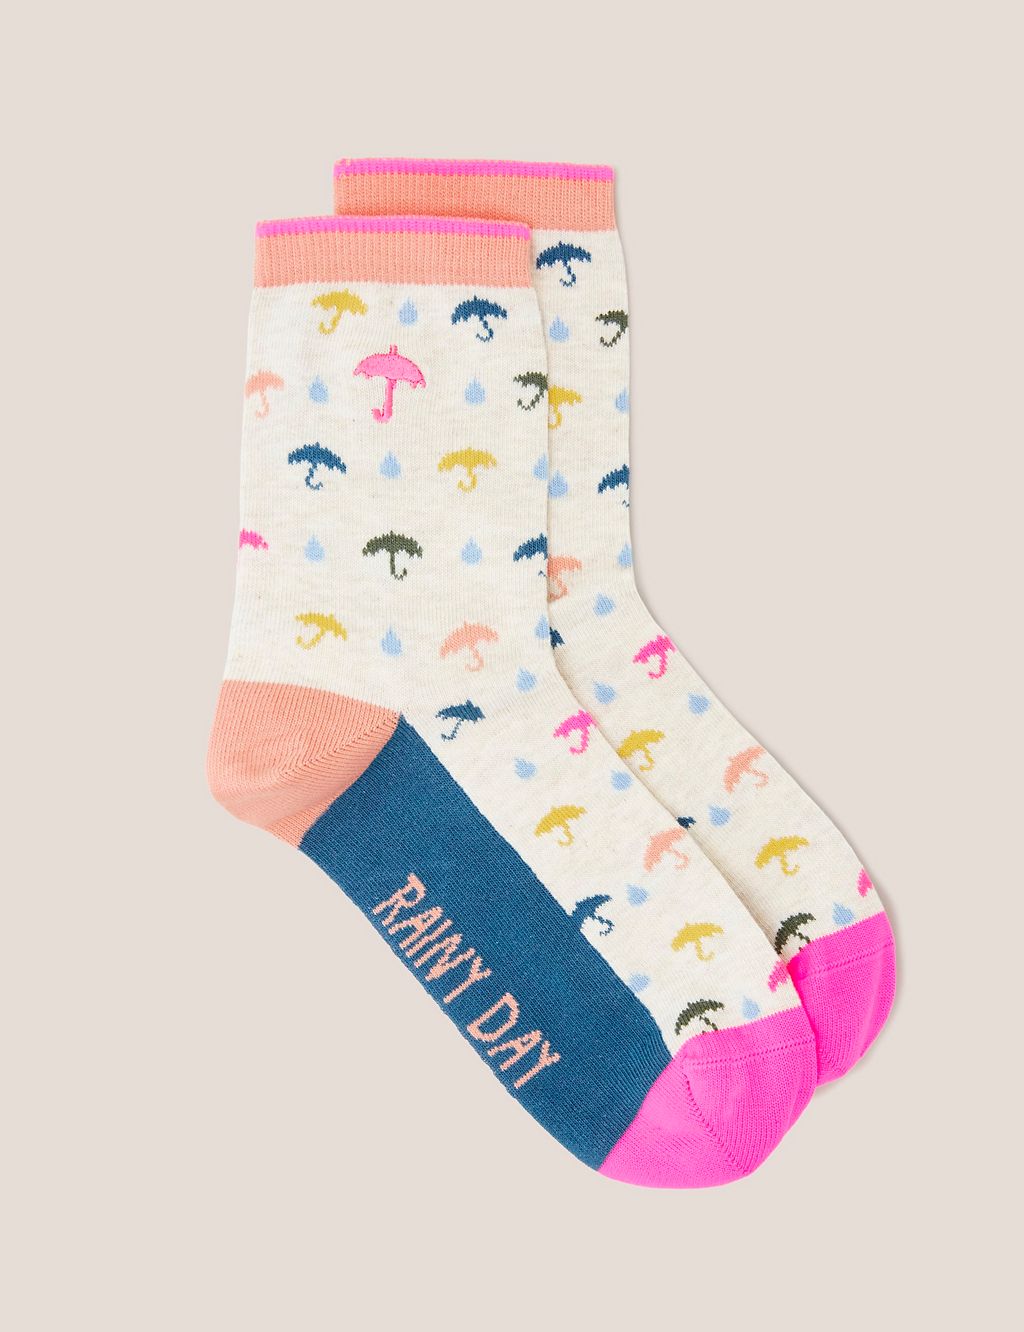 Cotton Rich Rainy Day Ankle High Socks 1 of 2